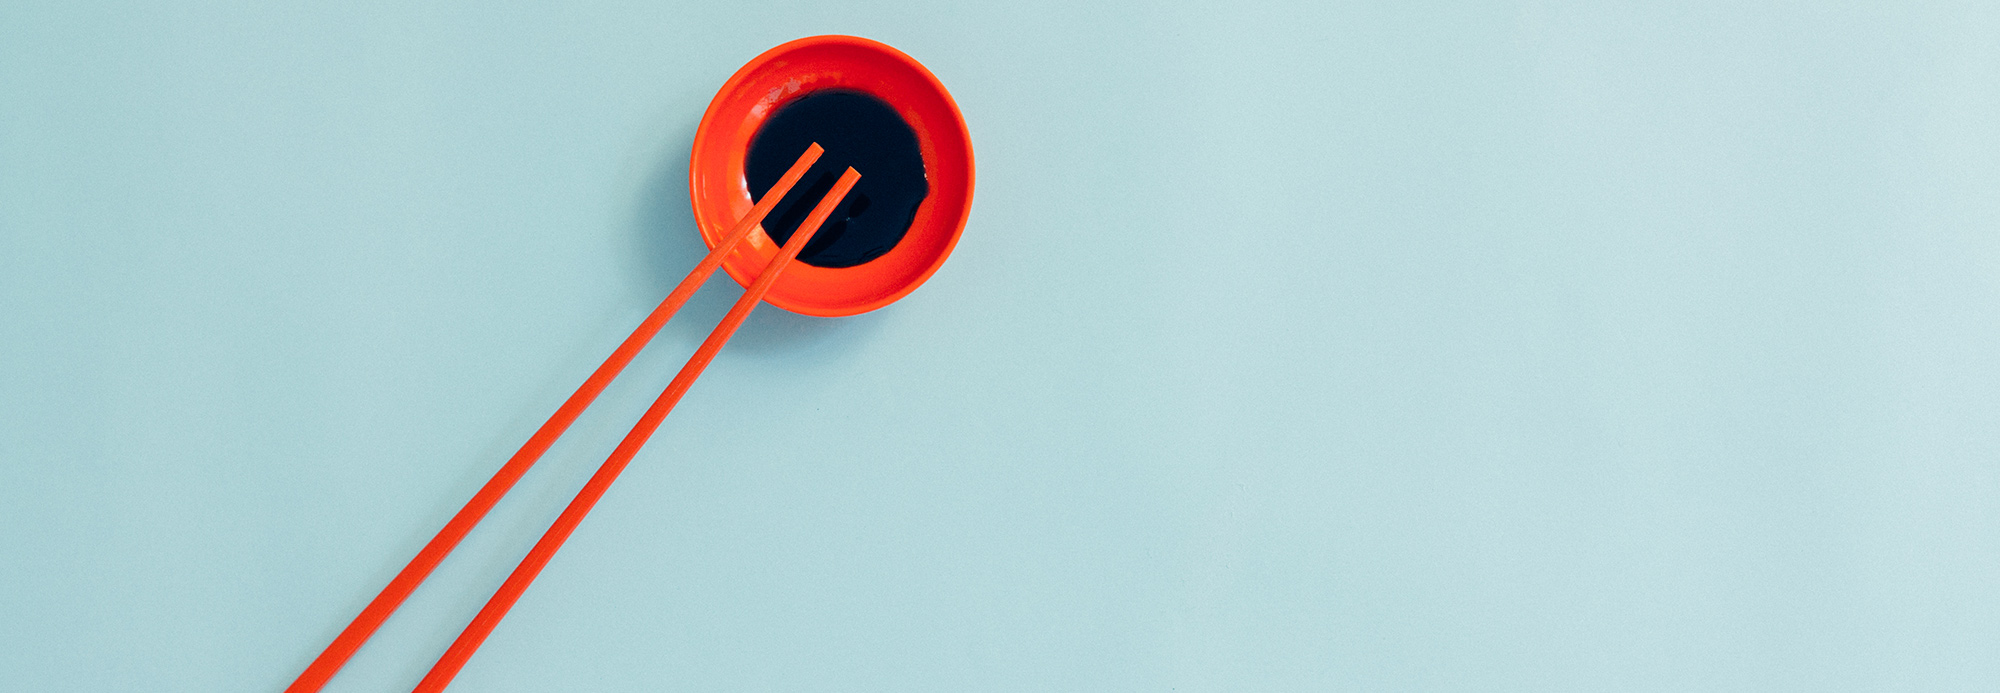 Overhead view of an orange dish of soy sauce and orange chopsticks on a blue background